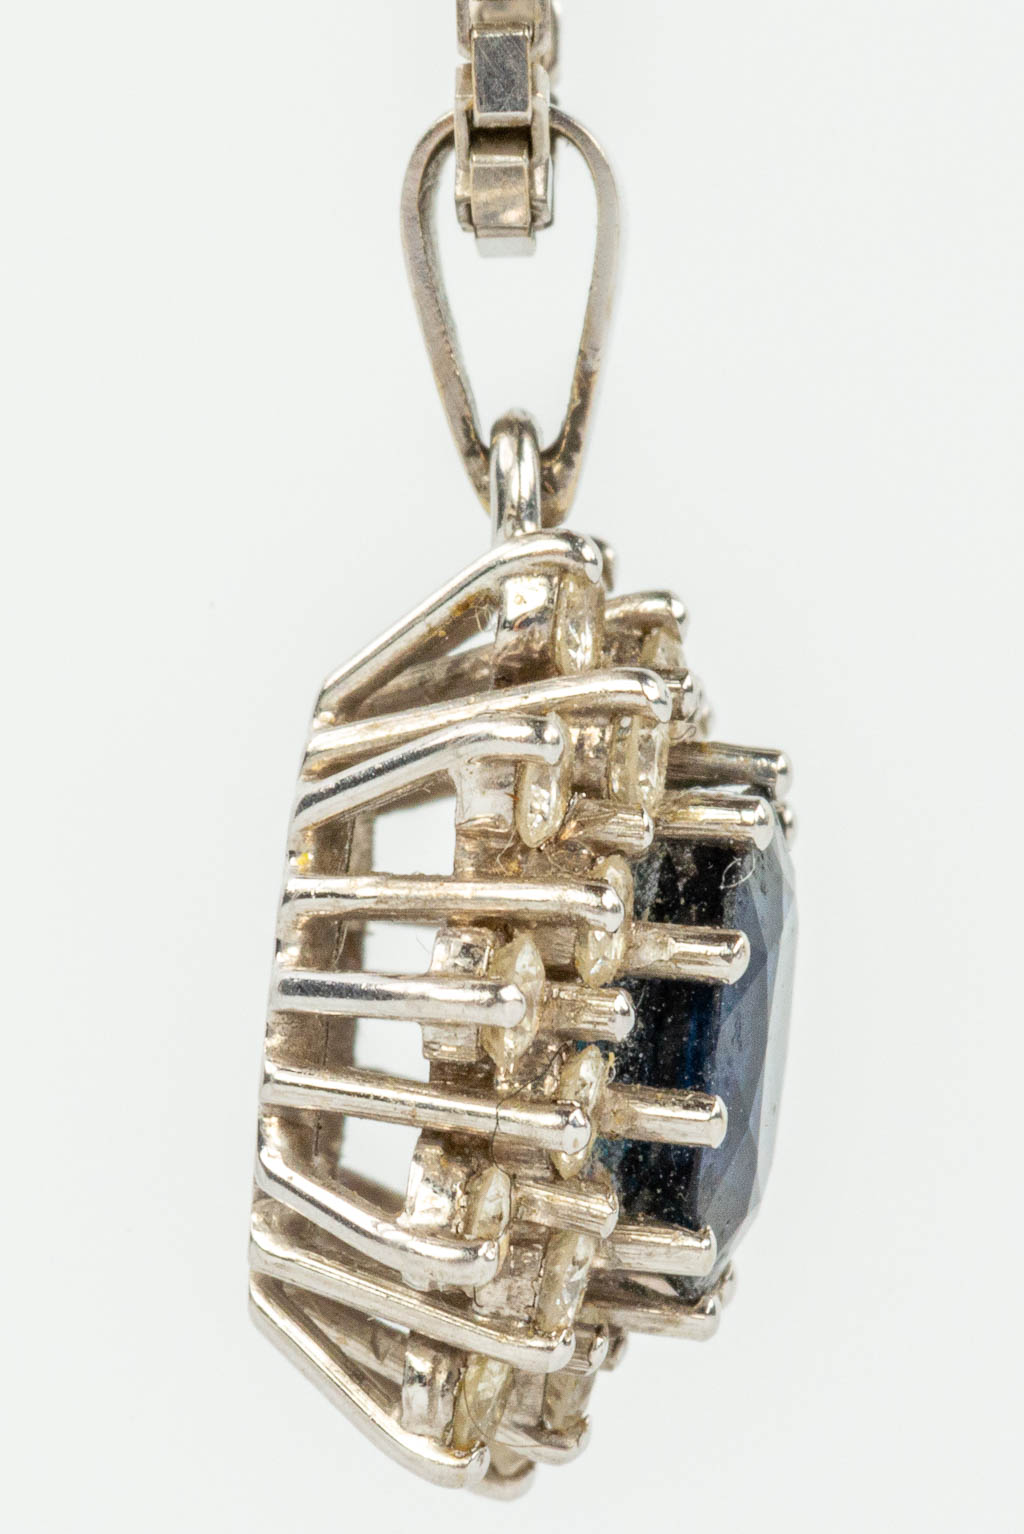 A necklace with a pendant made of 18 karat gold with a blue sapphire of 1,25 carat. 